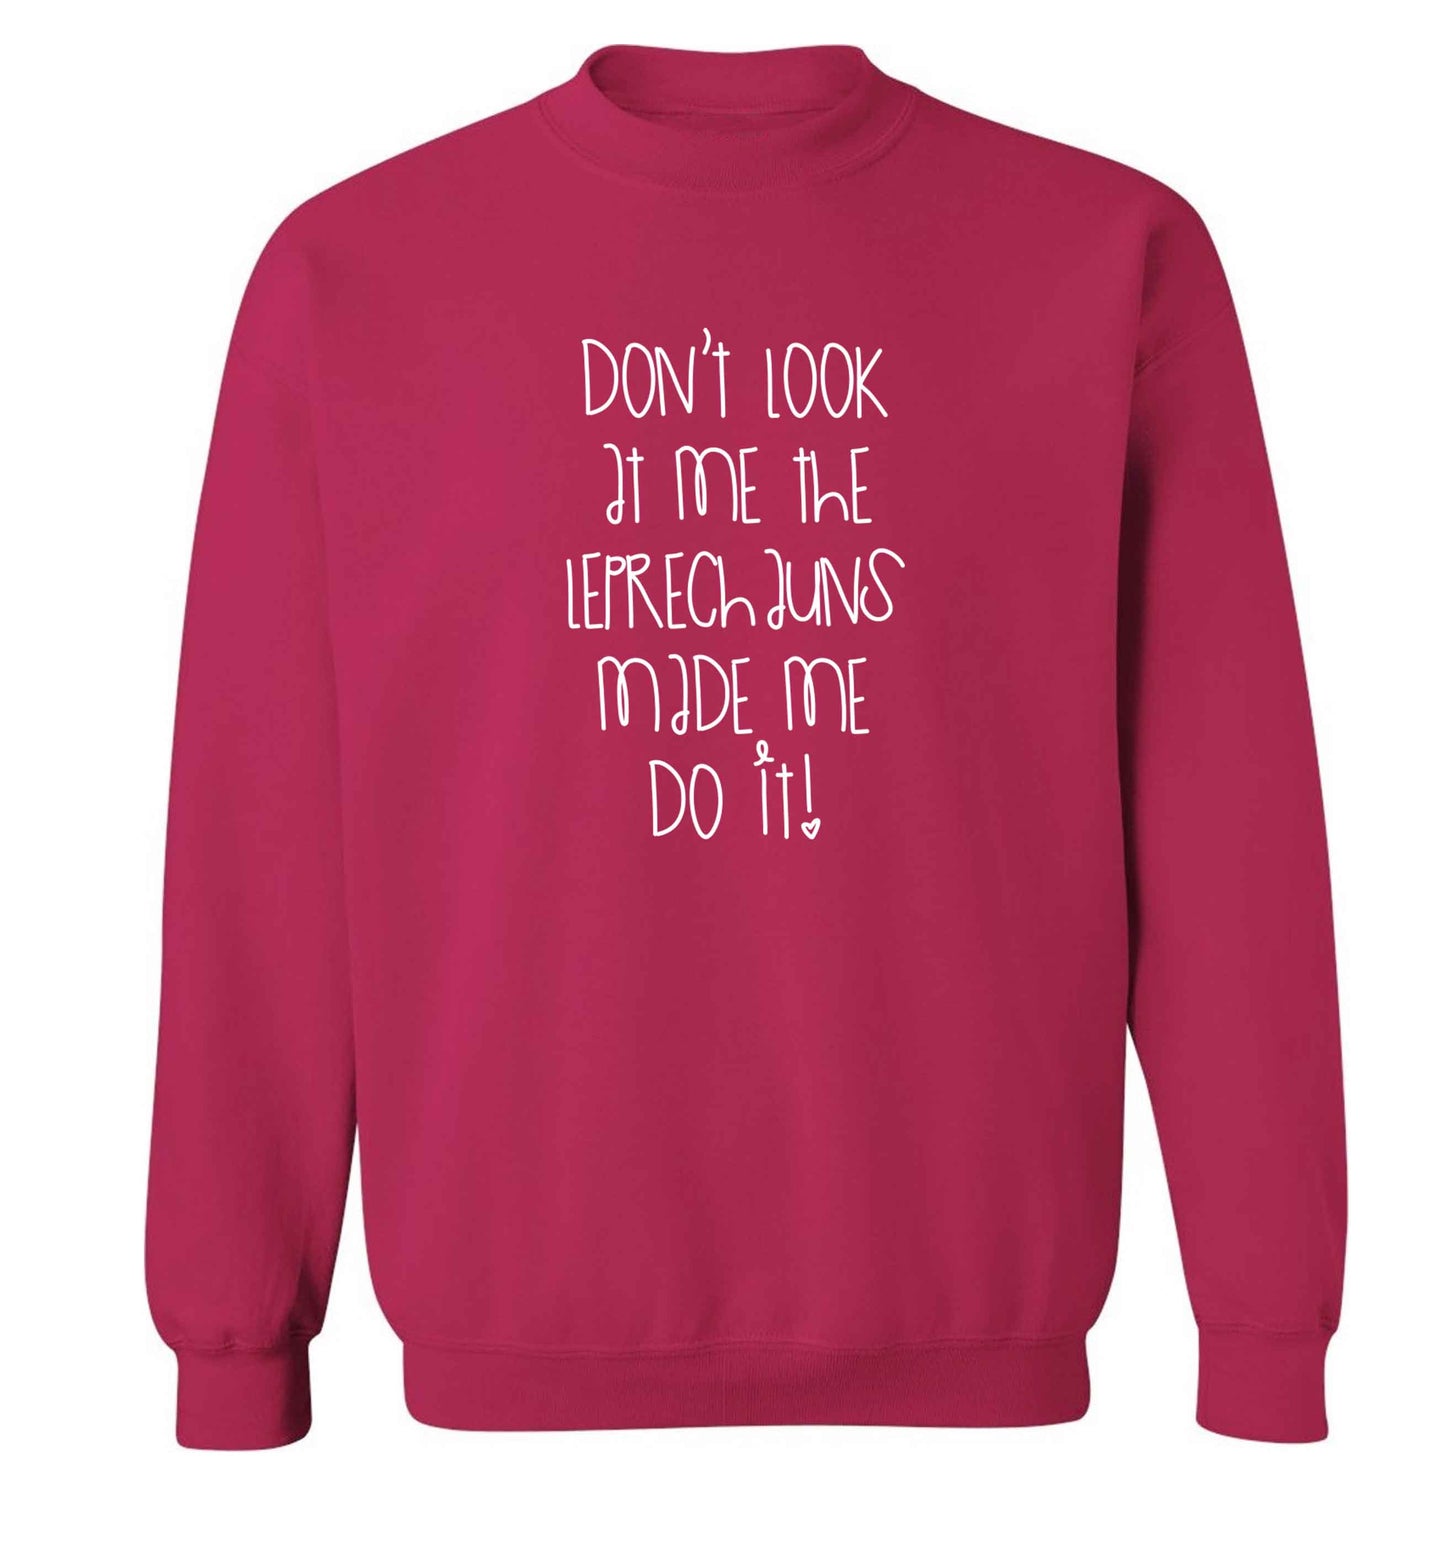 Don't look at me the leprechauns made me do it adult's unisex pink sweater 2XL